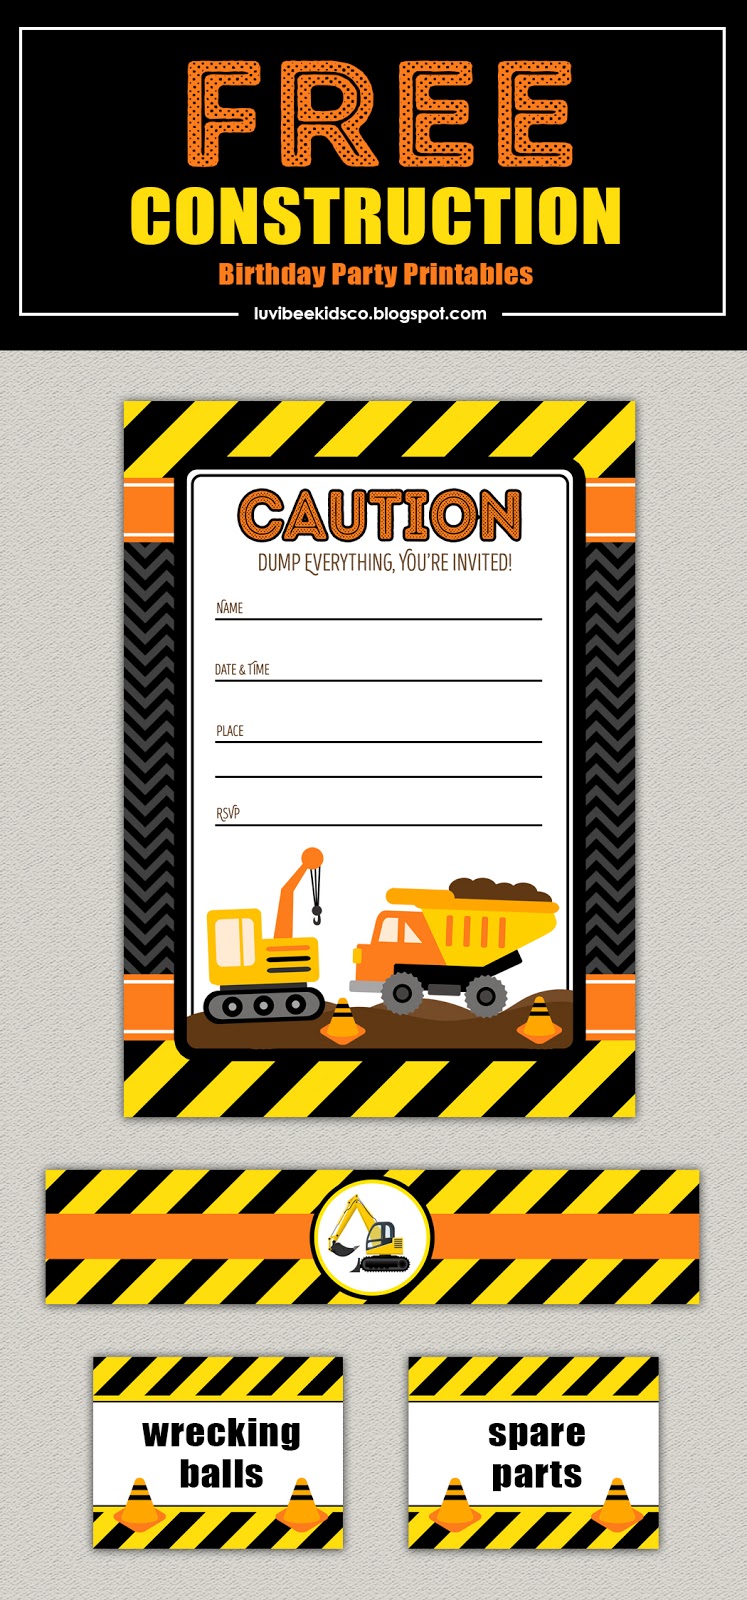 Free Construction Birthday Party Printables